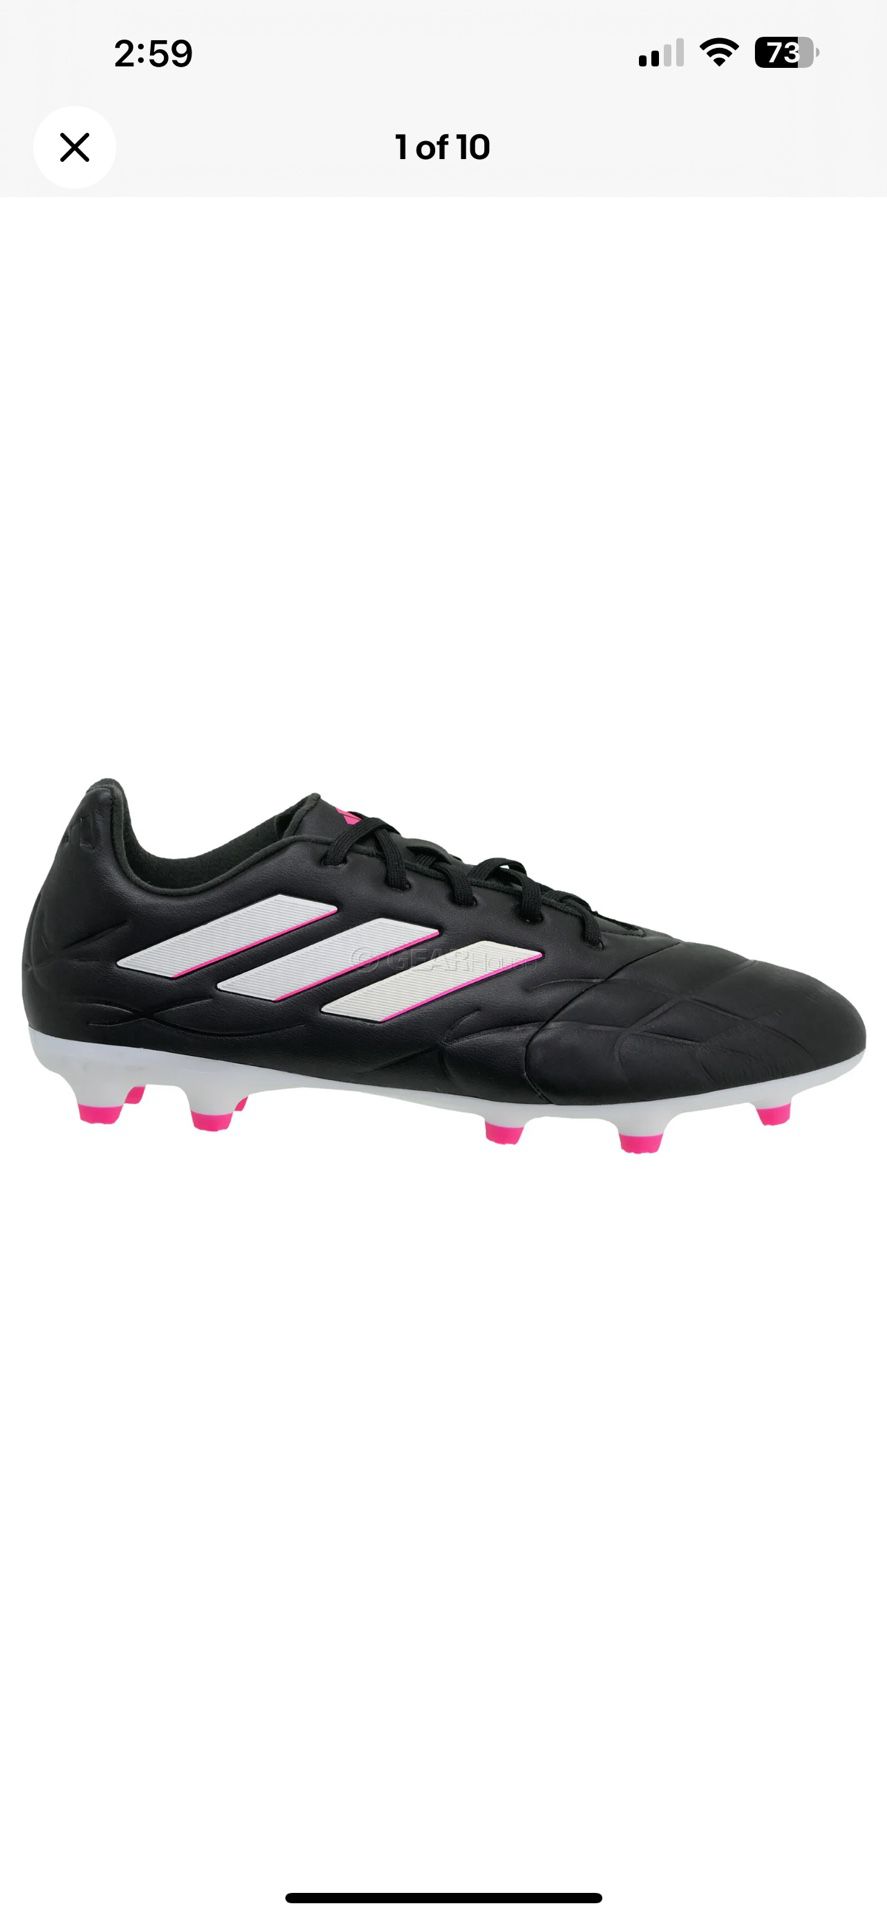 Adidas Copa Pure.3 FG Mens Leather Soccer Cleats, Black Pink, SIZE~10.5 MENS 